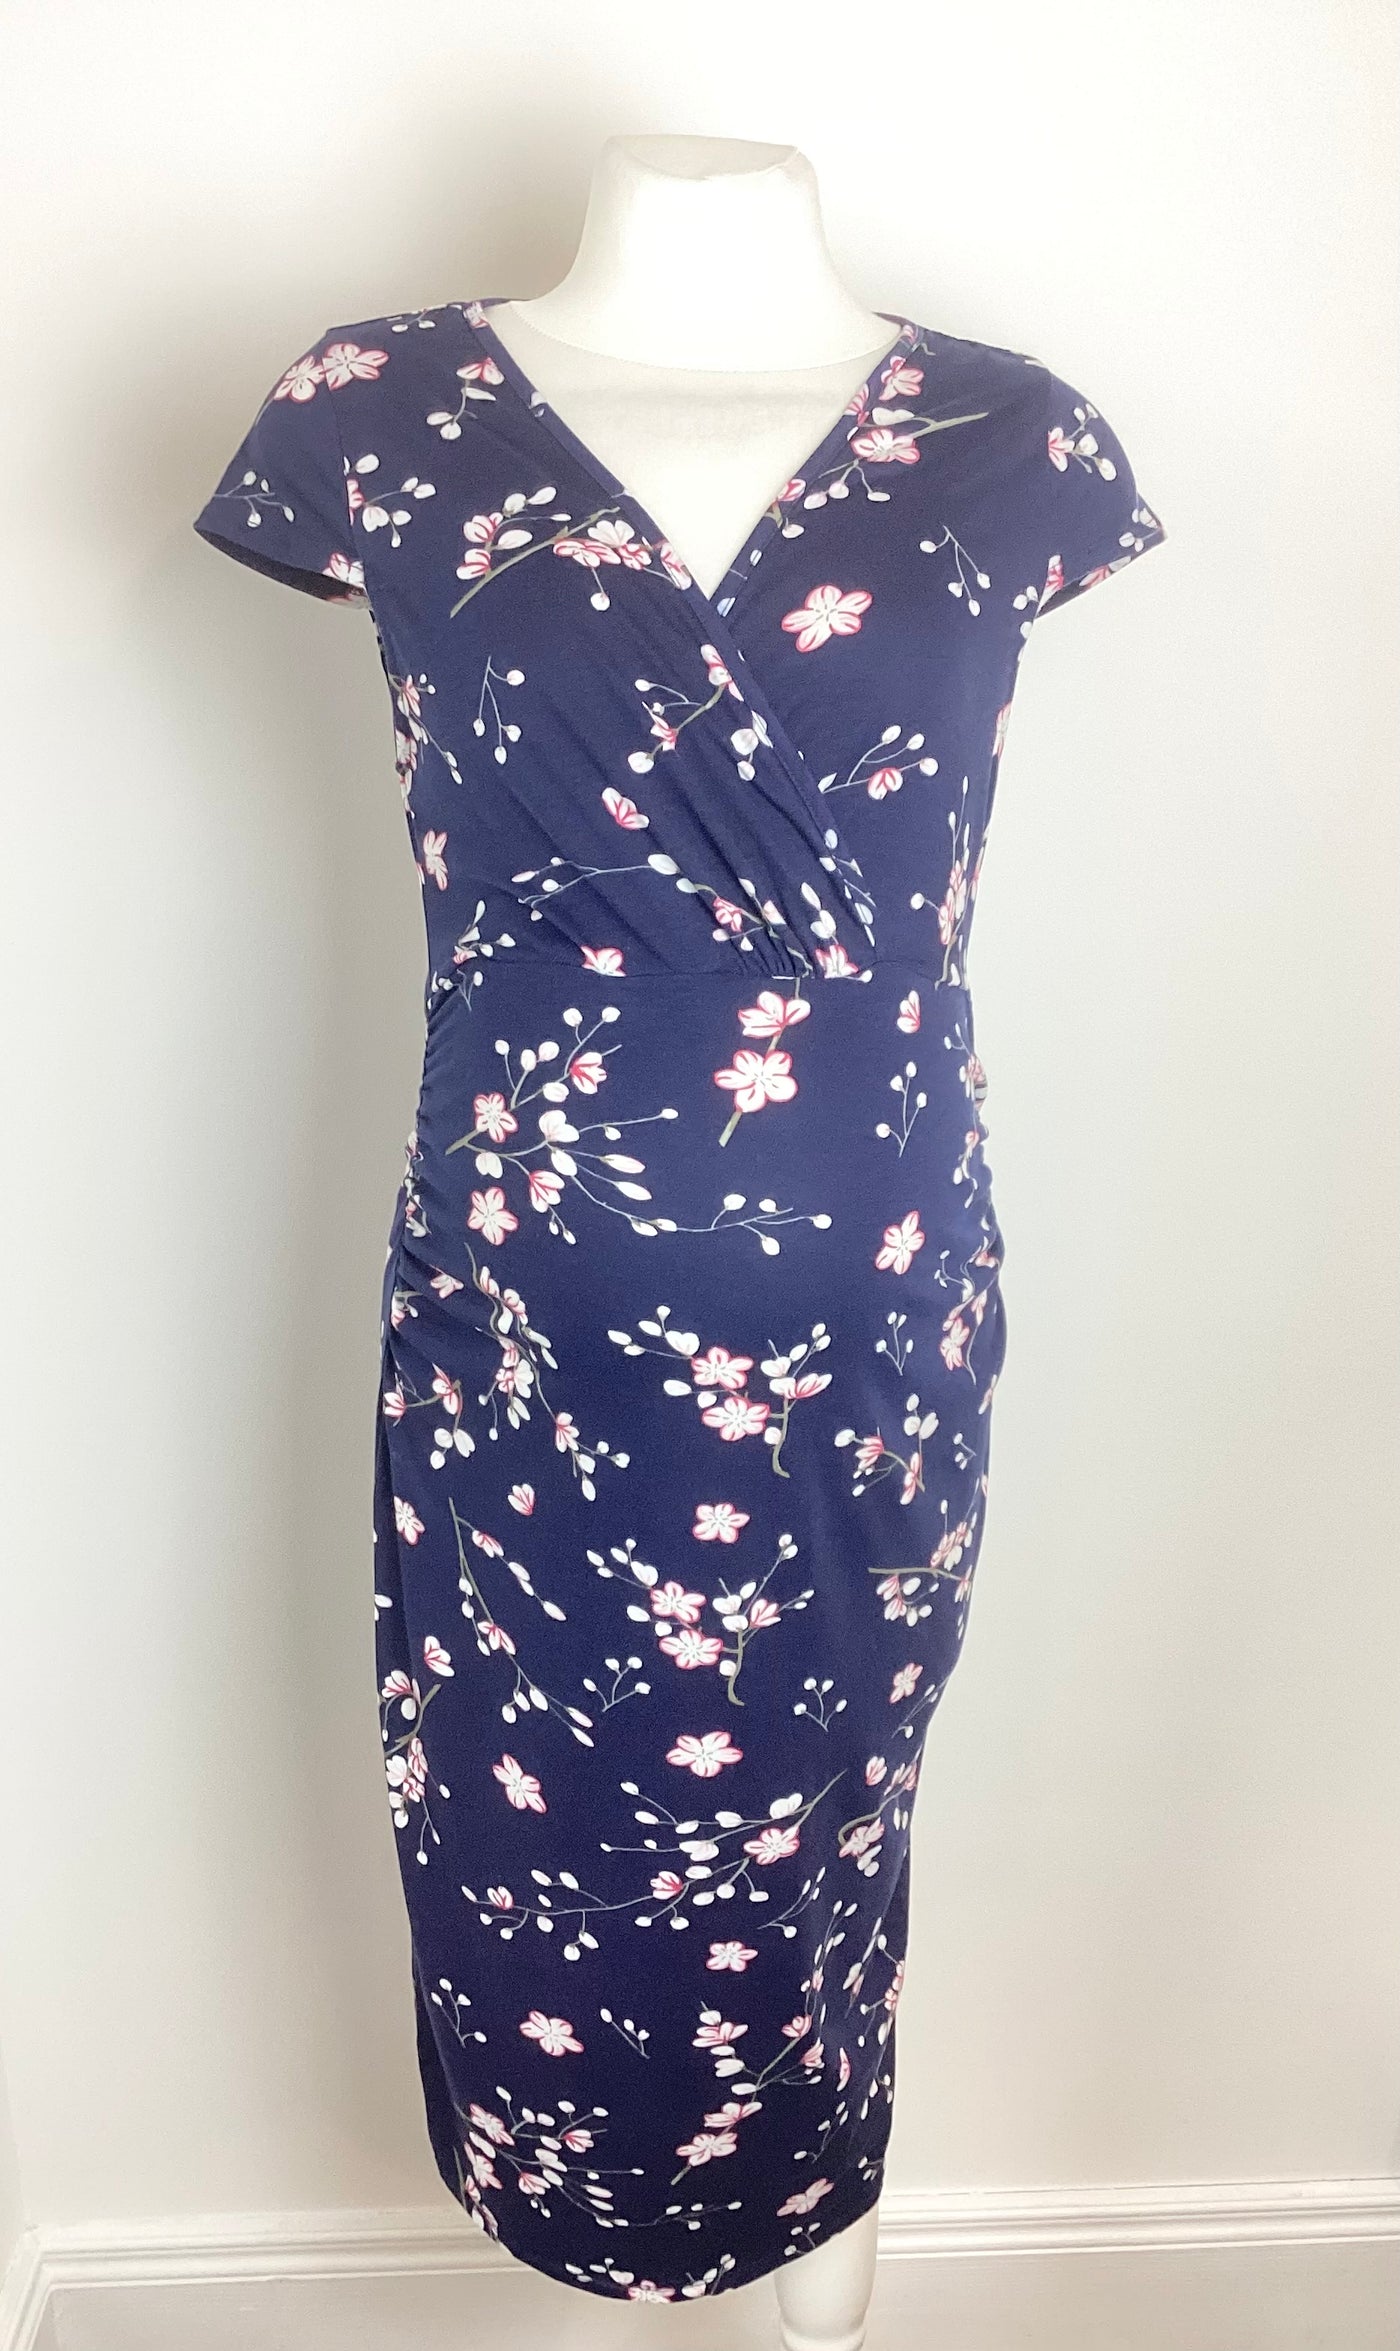 Dorothy Perkins Maternity navy & pink floral dress - Size 14